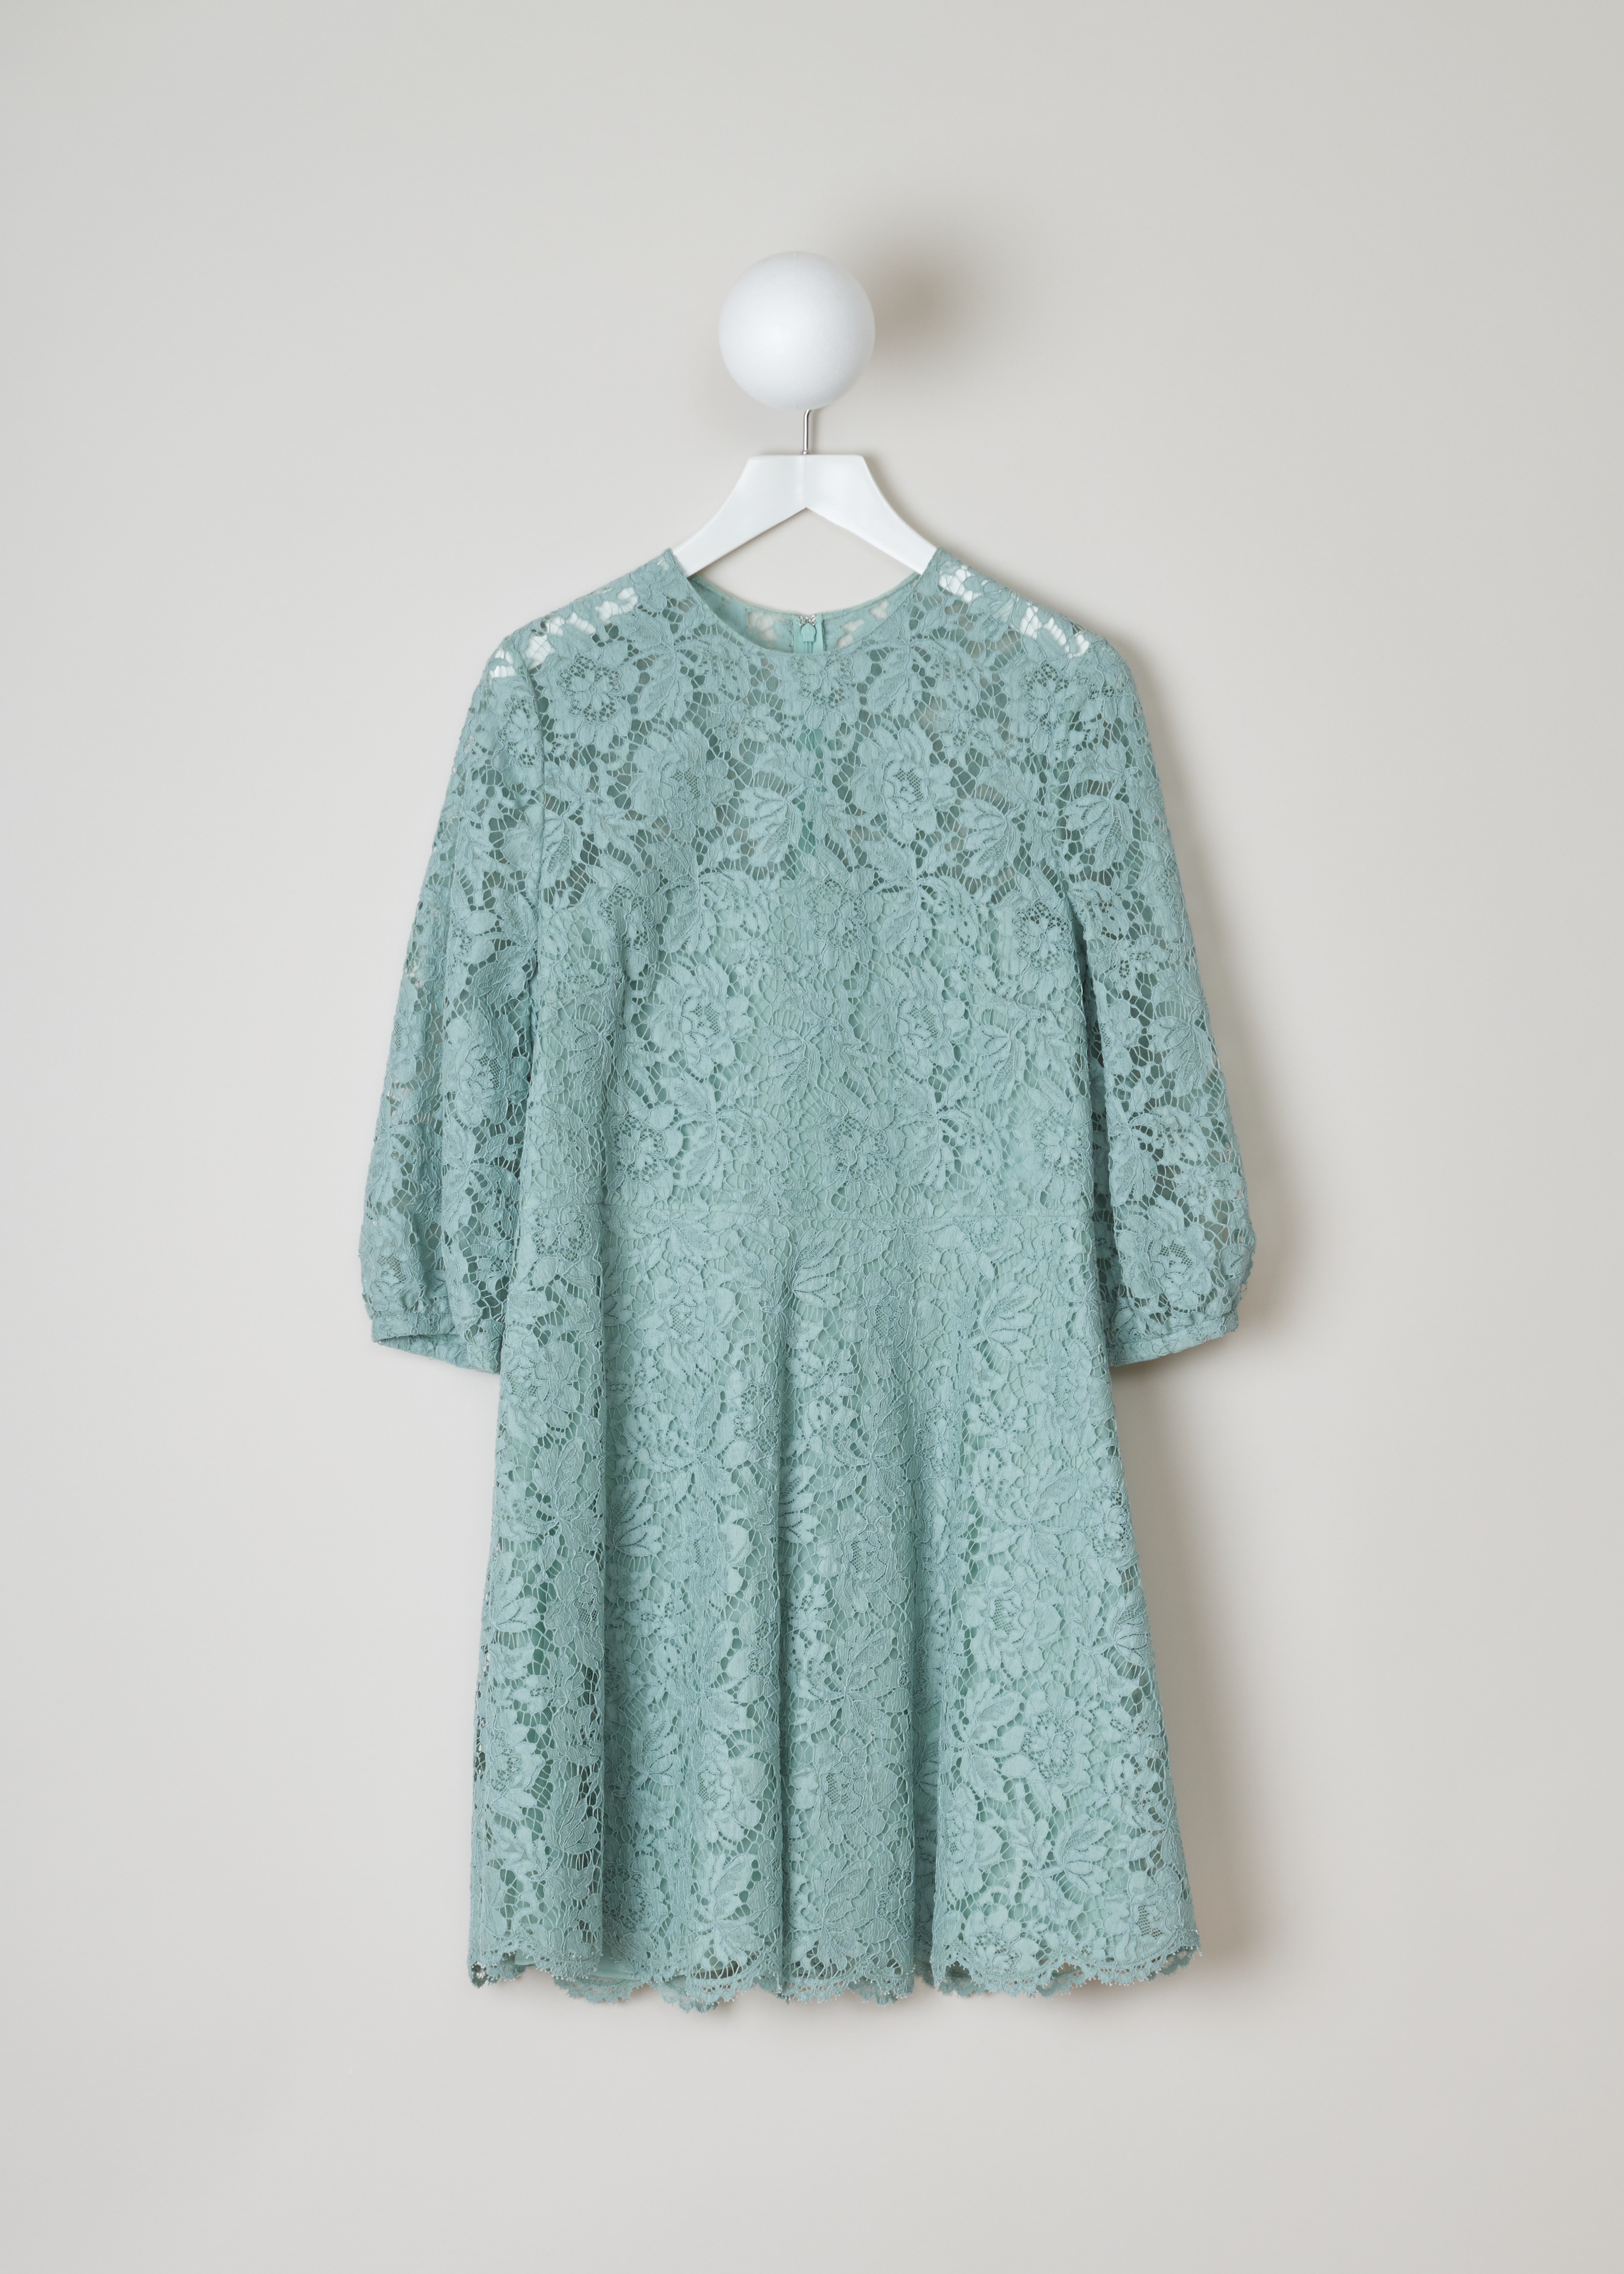 Valentino pastel green long sleeve lace dress RB0VALH71EC_5W0 light blue front. Pastel green dress in cotton lace, bishop sleeves, a fitted bodice with a close-fit neckline, an a-line skirt, scalloped hems and an invisible zip fastening on the back.